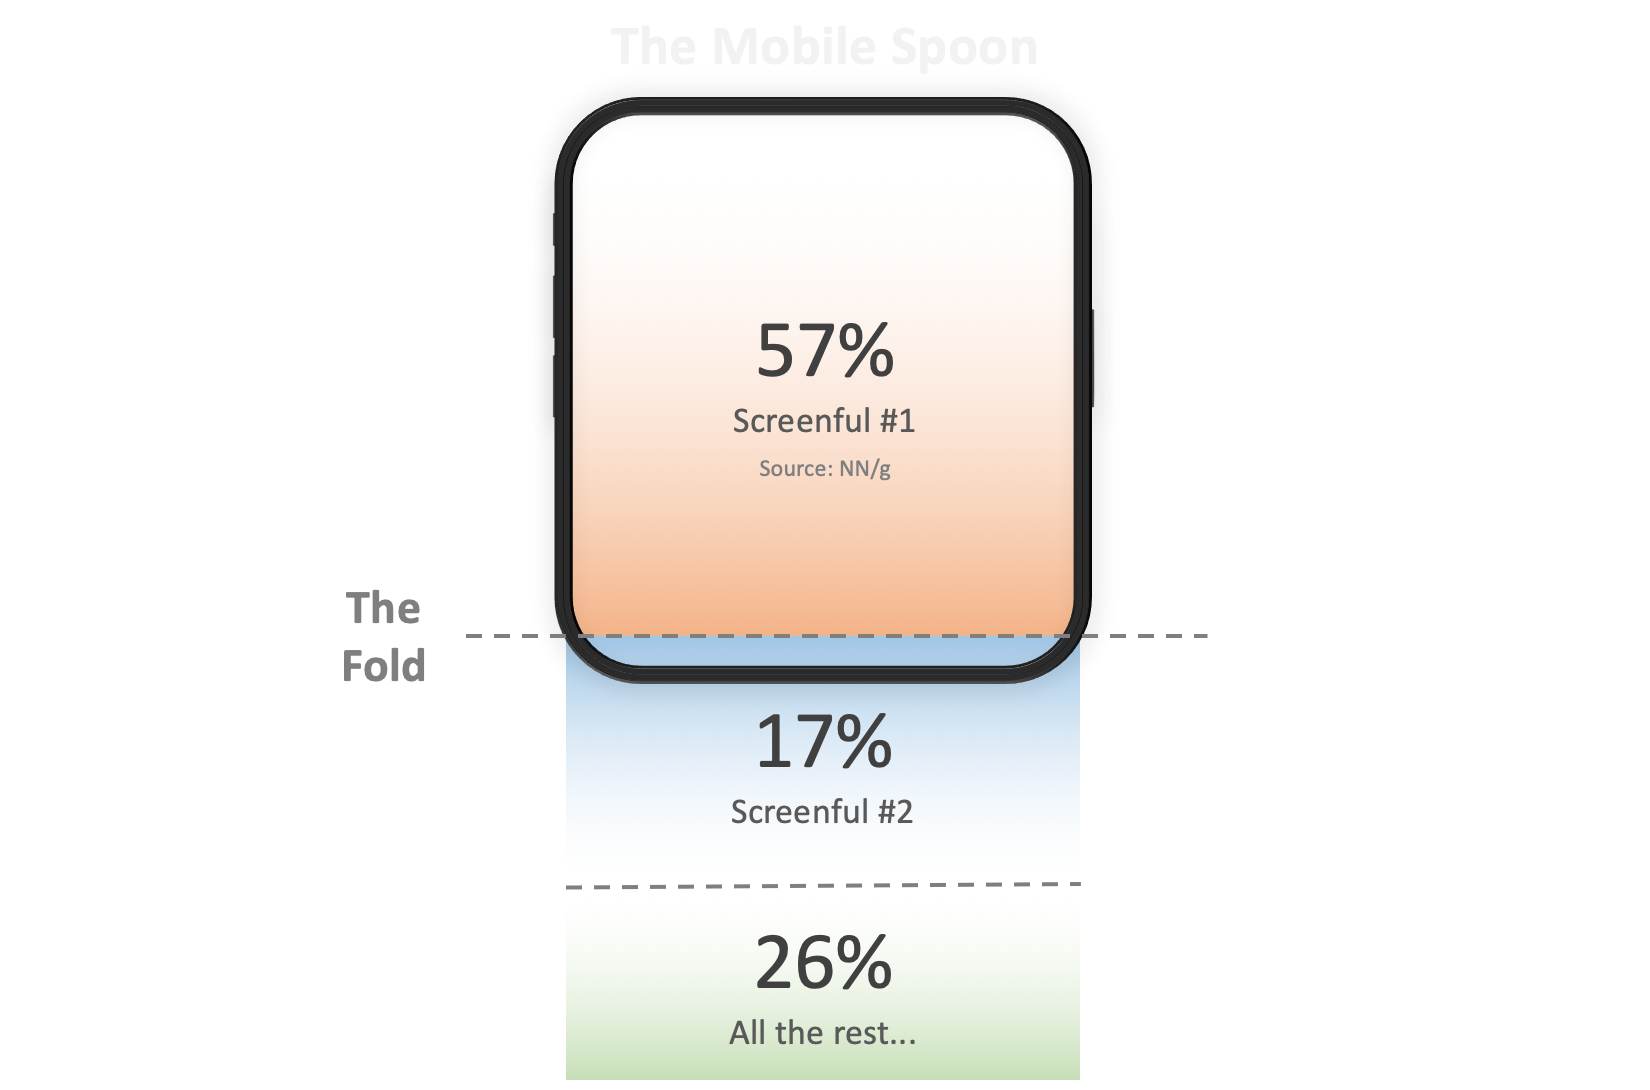 57% of the users viewing time is spent above the fold